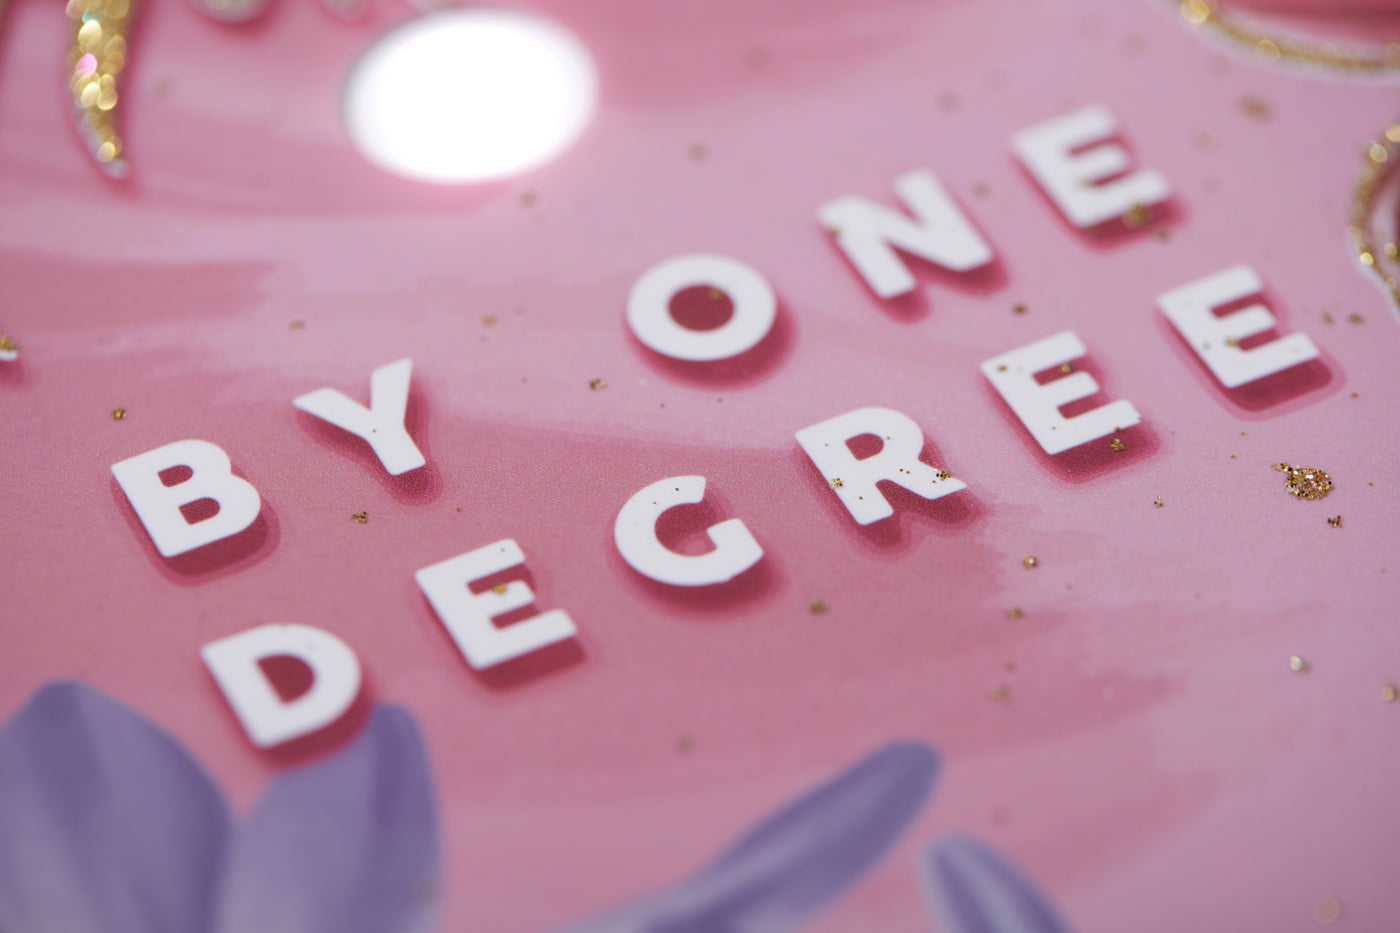 Graduation cap topper art print, Now hotter by one degree